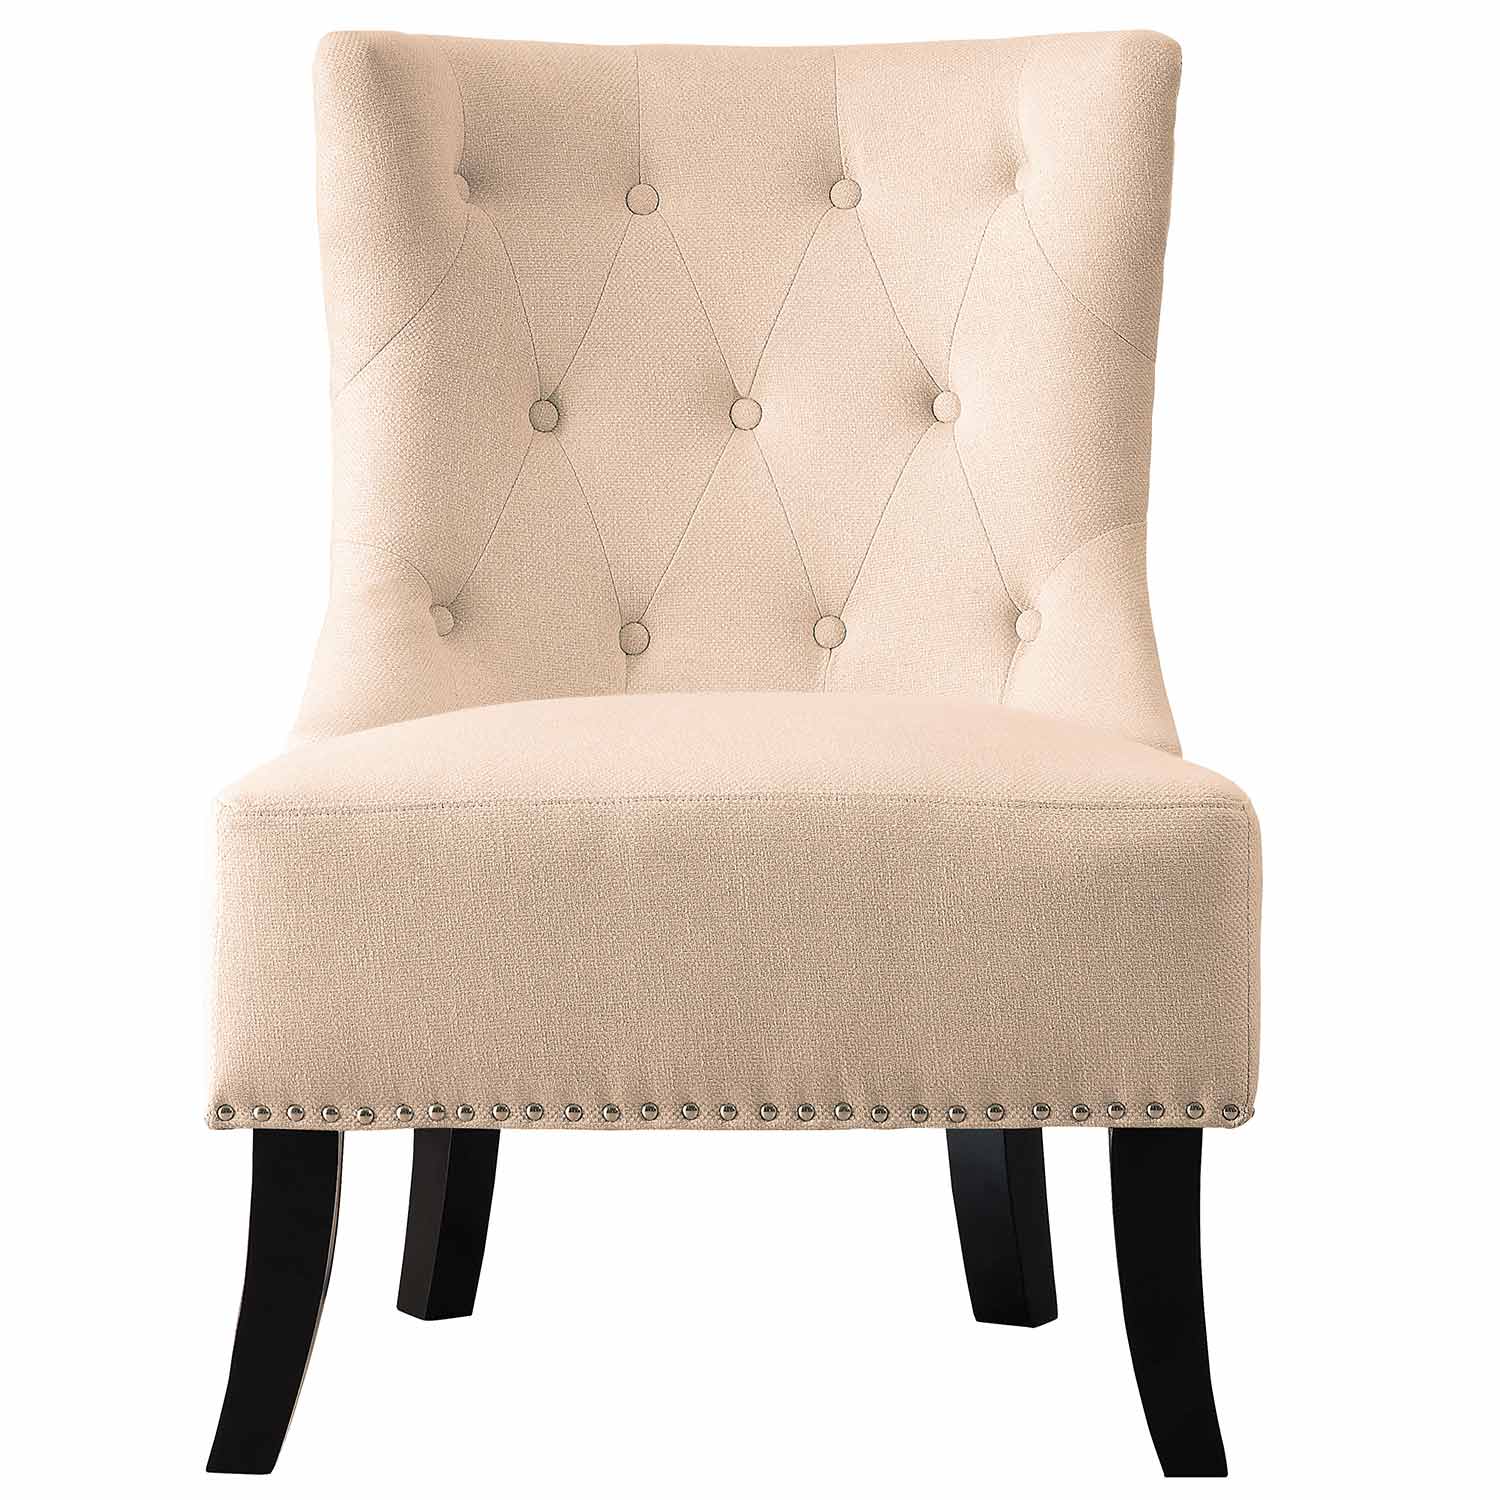 Homelegance Paighton Accent Chair - Beige